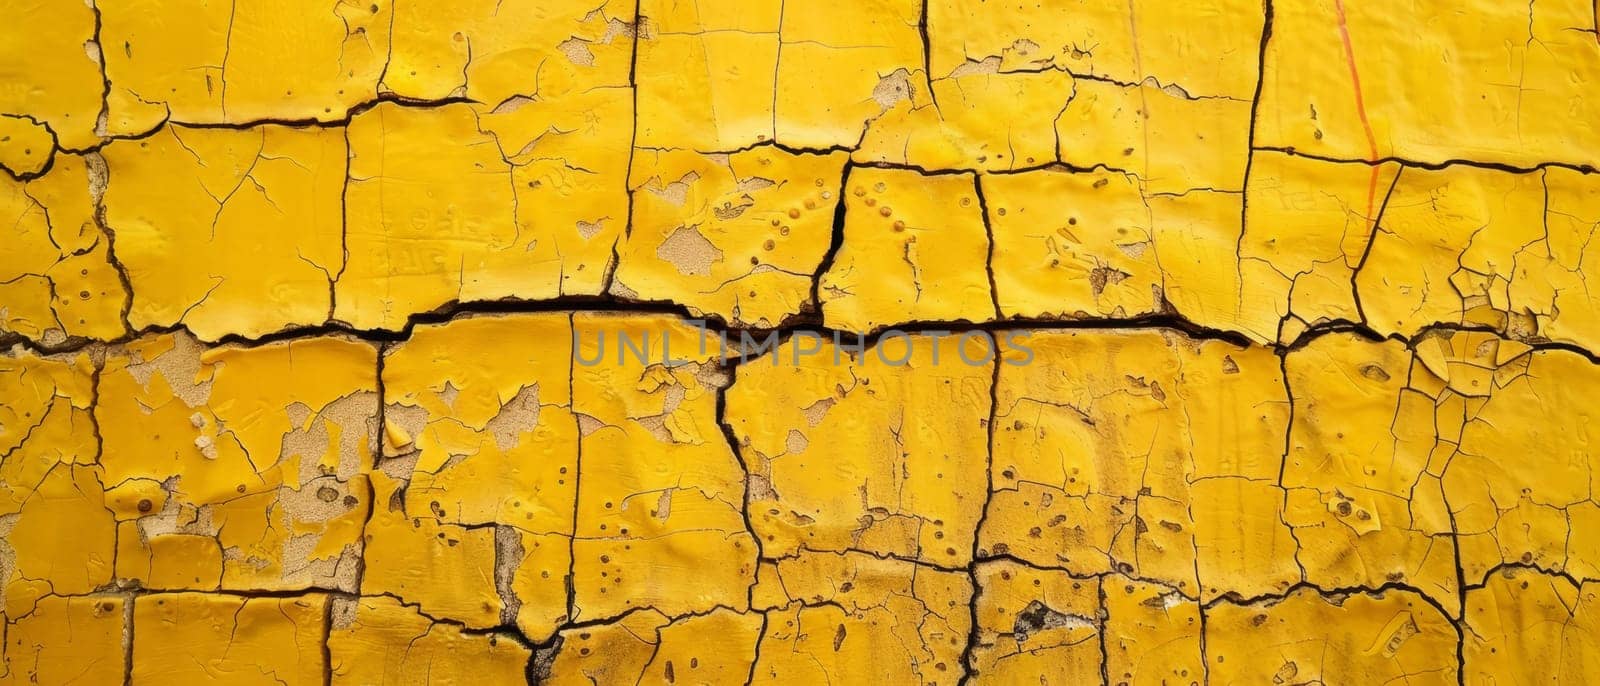 Layers of yellow paint crack and peel away, revealing the raw texture of the wall beneath. The image evokes a sense of history and change. by sfinks